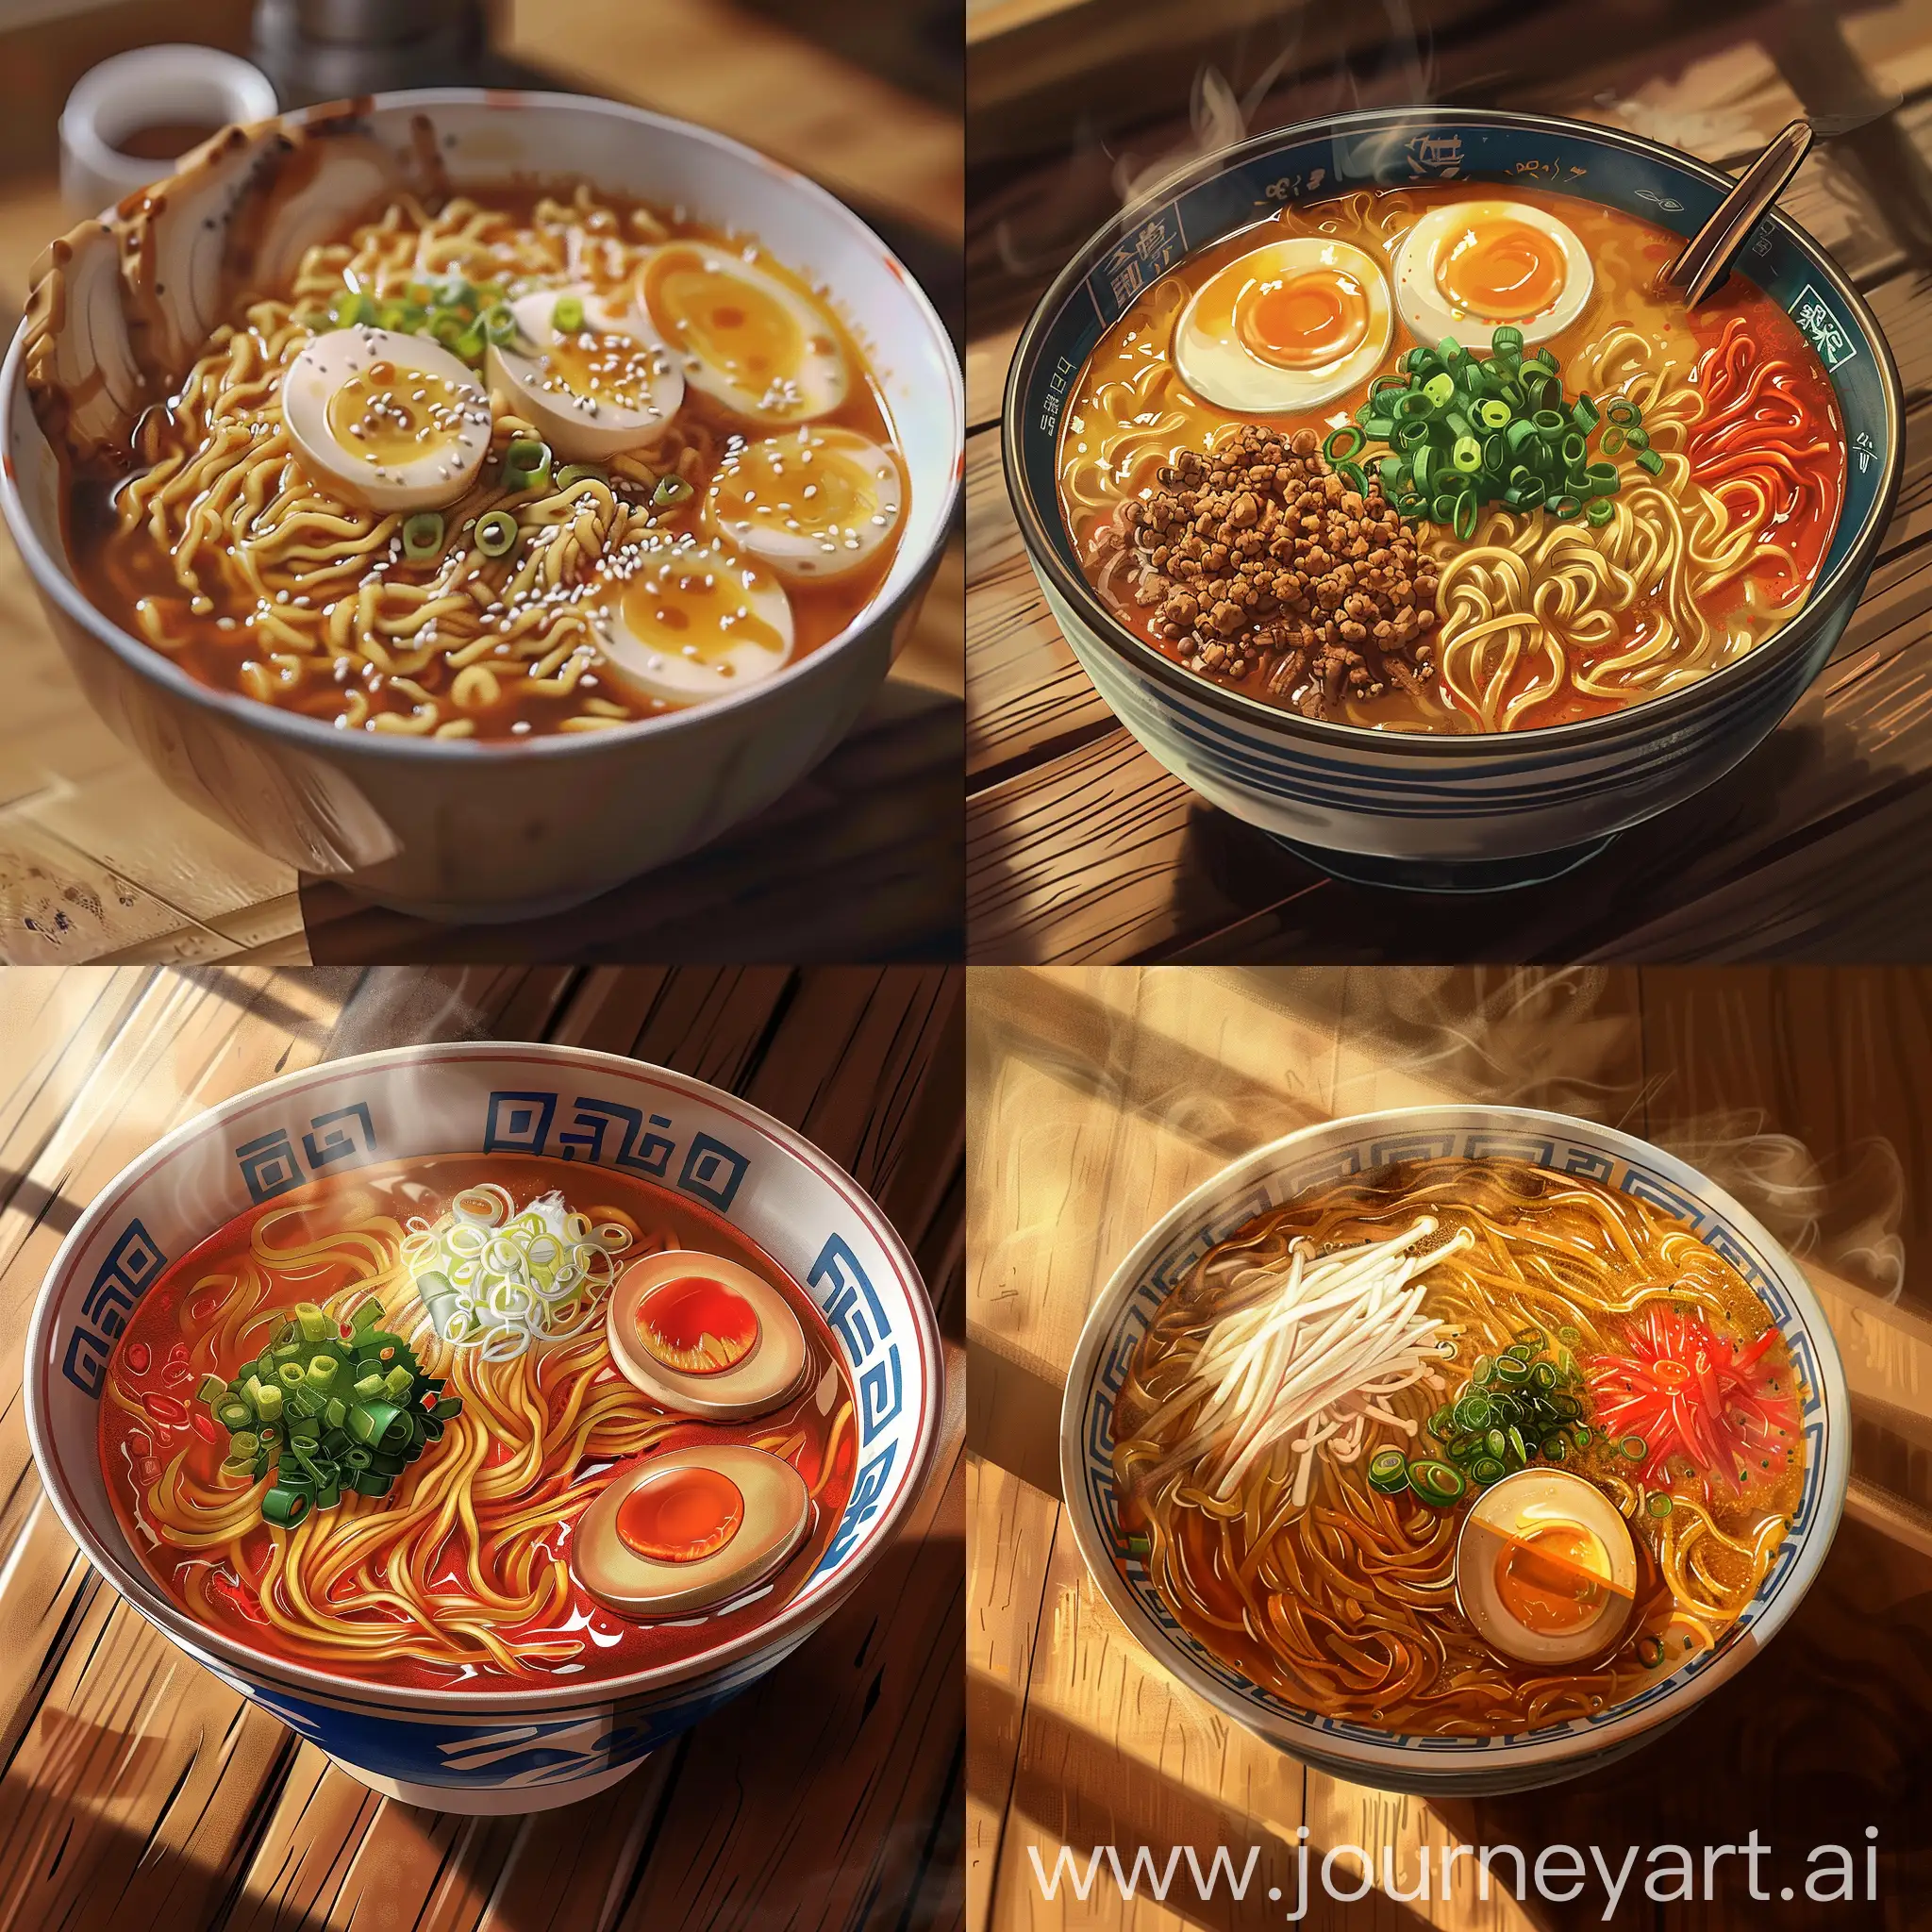 Anime style,makato shinkai style, a close up view,best camera angle,a ramen view in bowl,tasty,its hit,on a wooden table,everything in the Ramen is detailed and realistic anime style touch,realistic but yet stylized.